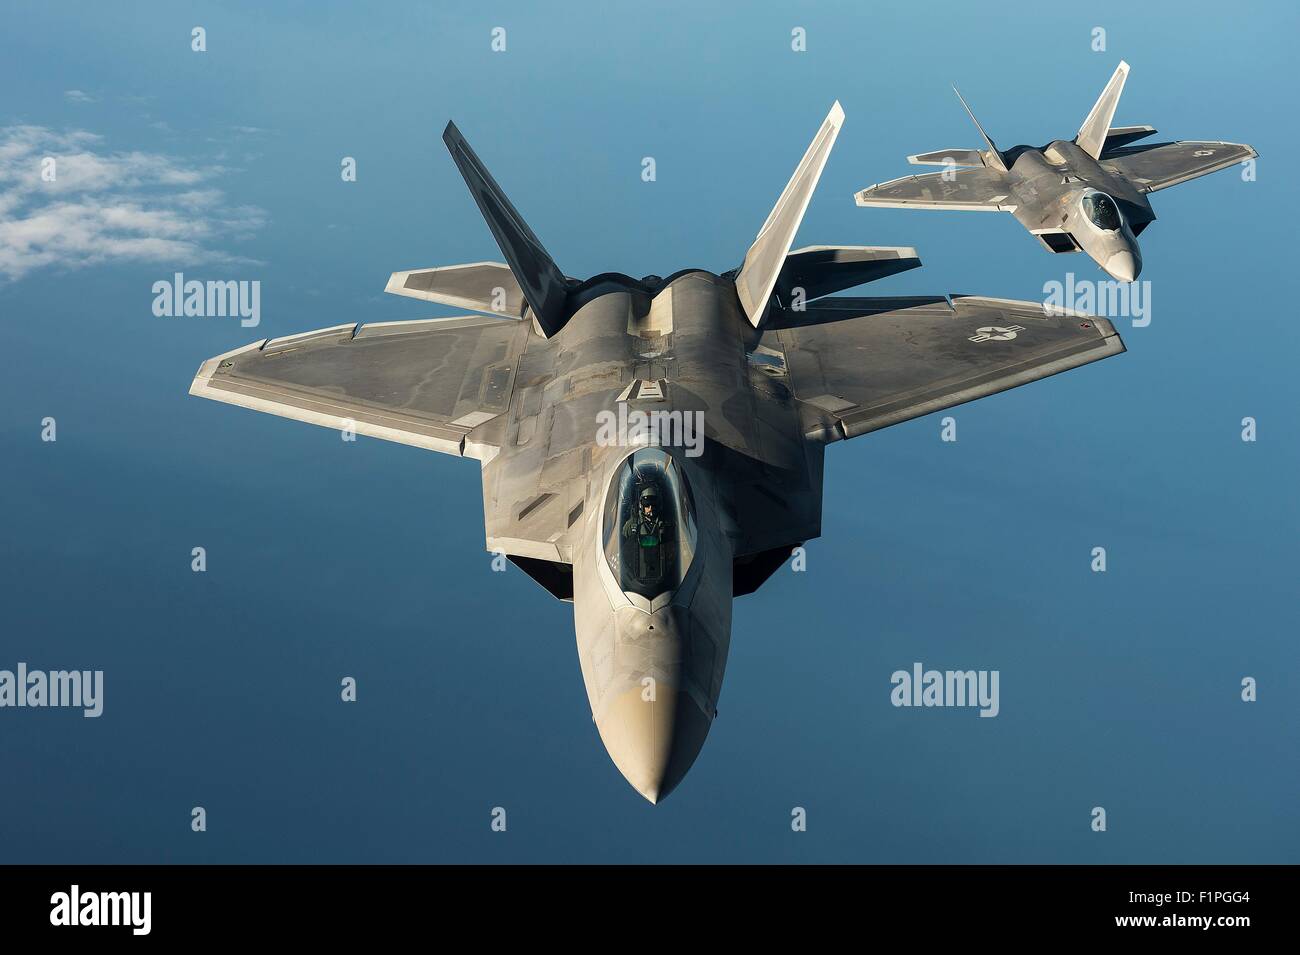 U.S. Air Force F-22 Raptor stealth fighter aircraft fly in formation over the Baltic Sea during a forward deployment in support of NATO partners in Europe September 4, 2015 near Tallinn, Estonia. Stock Photo